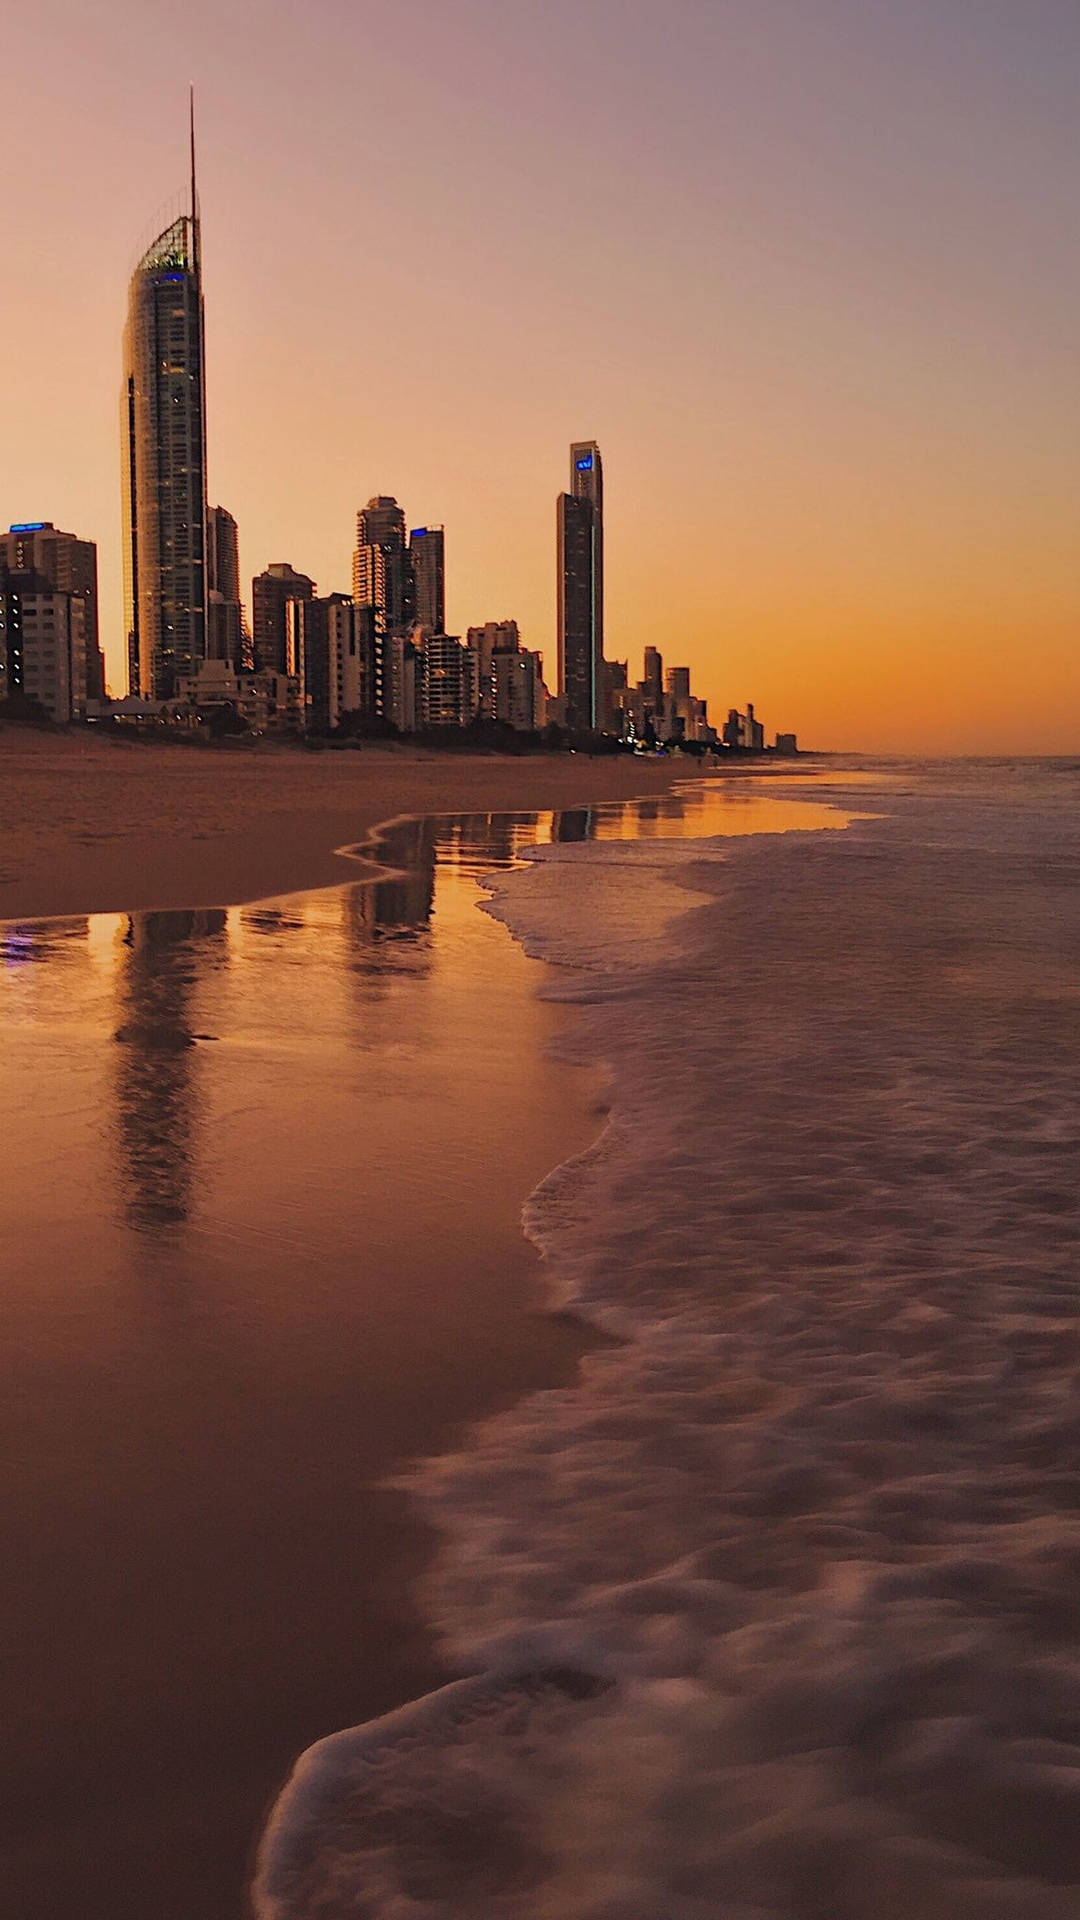 4k Iphone City During Sunset On Beach Background